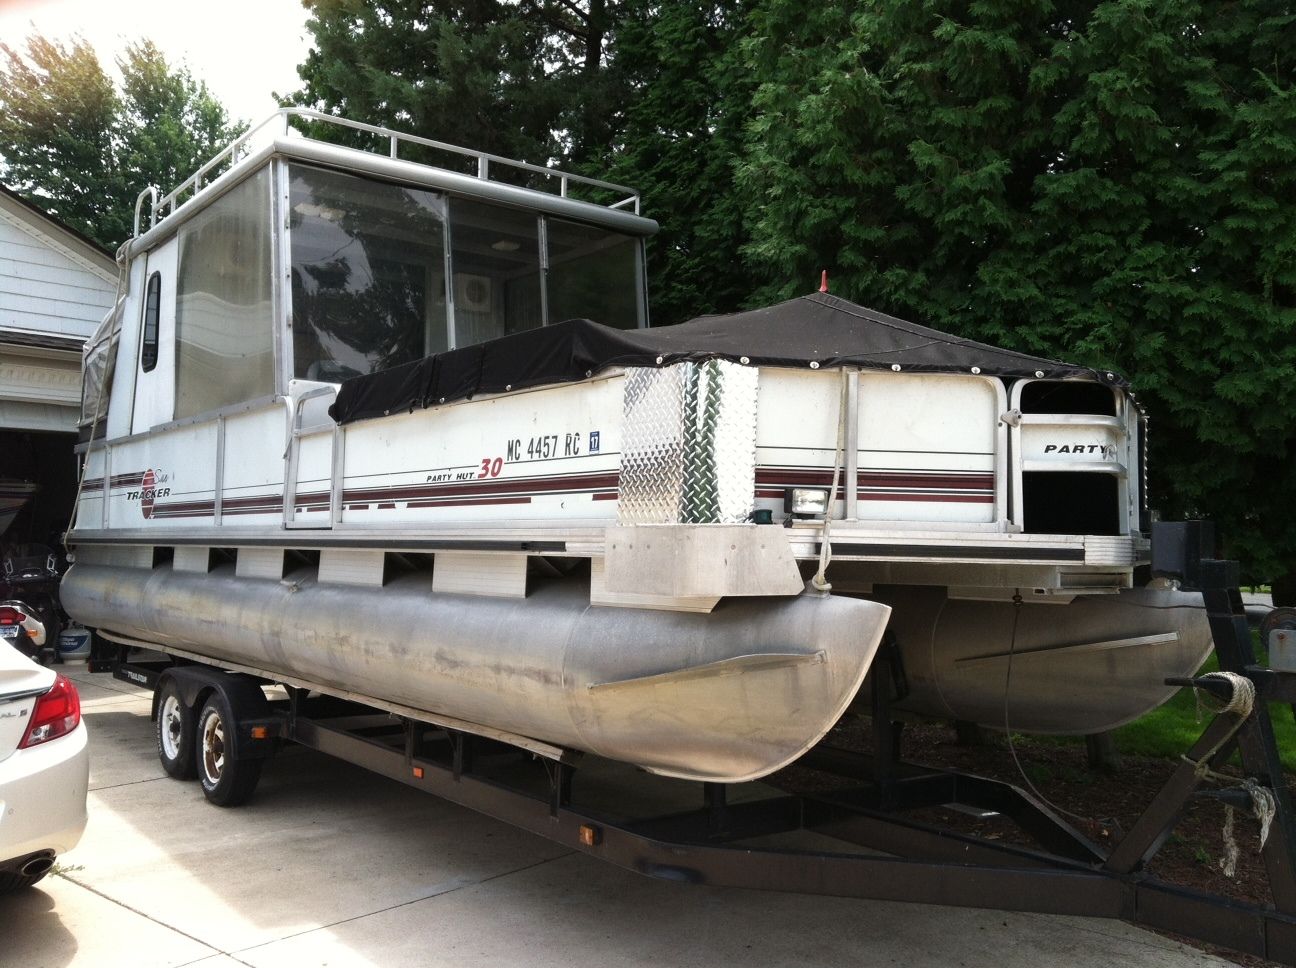 Sun Tracker Party Hut 30' 1995 for sale for $5,000 - Boats 